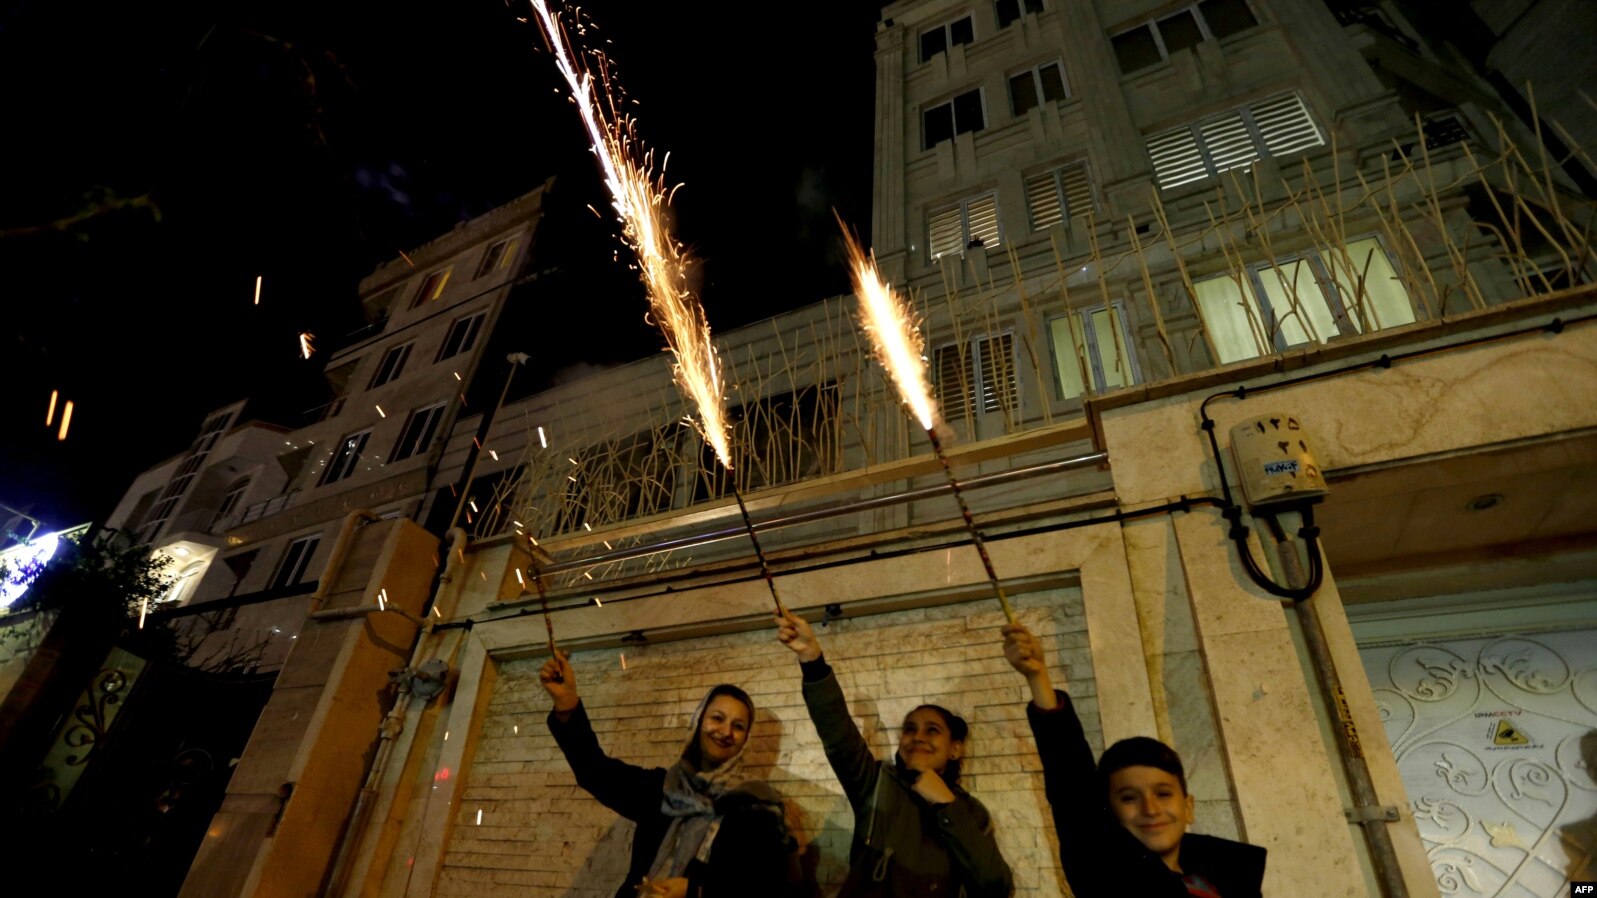 Iranian families light firecrackers outside their houses in Tehran on March 13, 2018 during the Wednesday Fire feast, or Chaharshanbeh Soori, held annually on the last Wednesday eve before the Spring holiday of Noruz. The Iranian new year that begins on